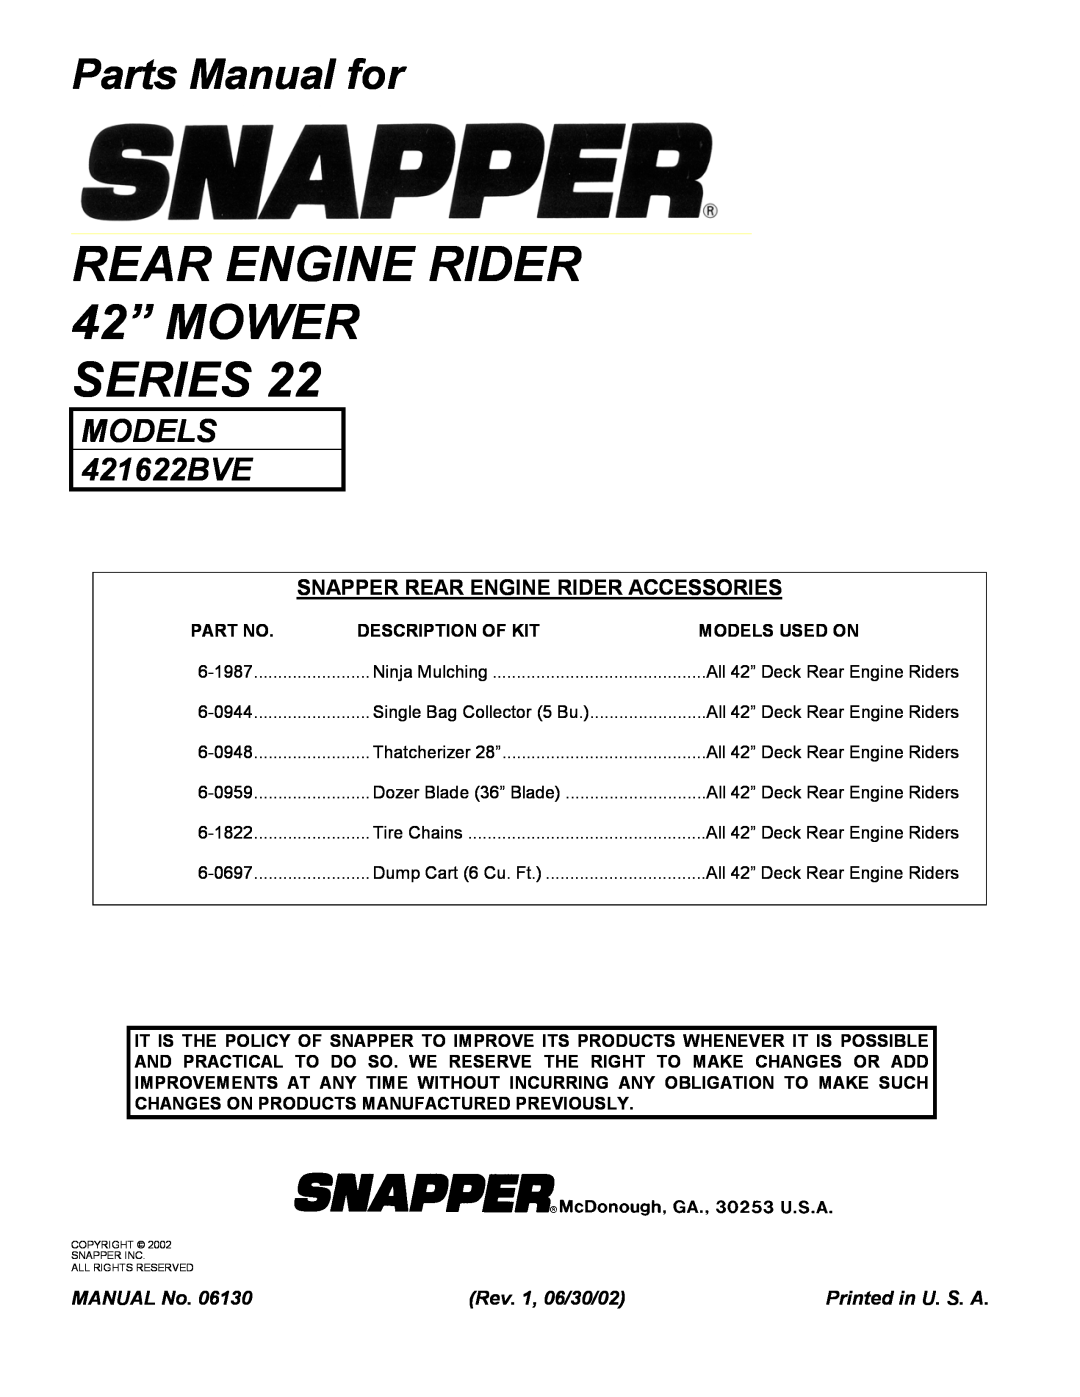 Snapper 421622BVE Snapper Rear Engine Rider Accessories, MANUAL No, Description Of Kit, Models Used On, Parts Manual for 